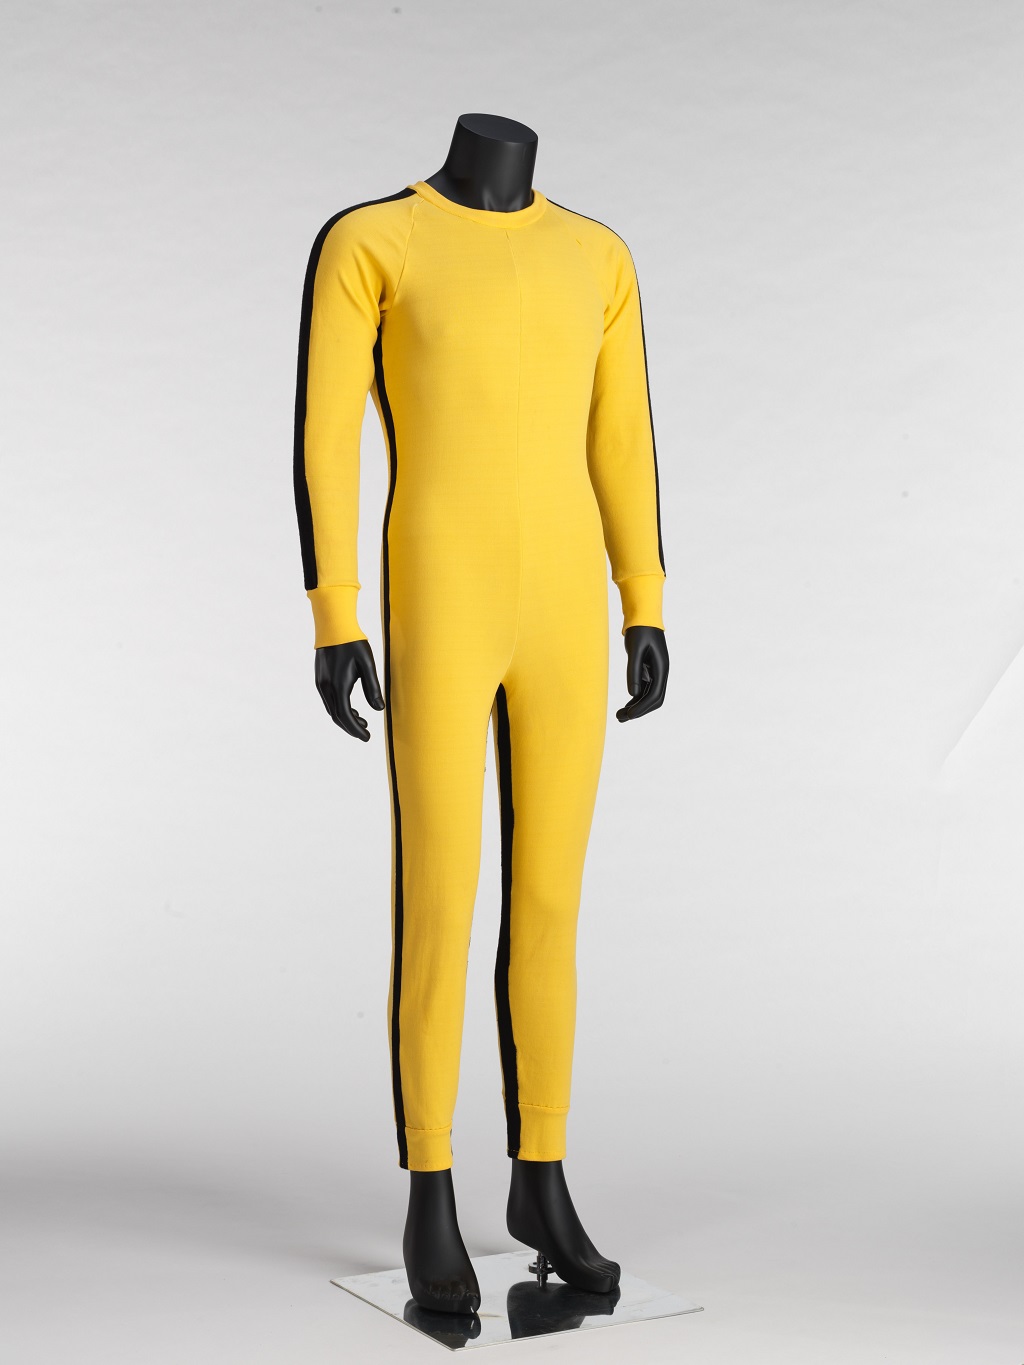 The classic yellow track suit worn by Bruce Lee in the film The Game of Death